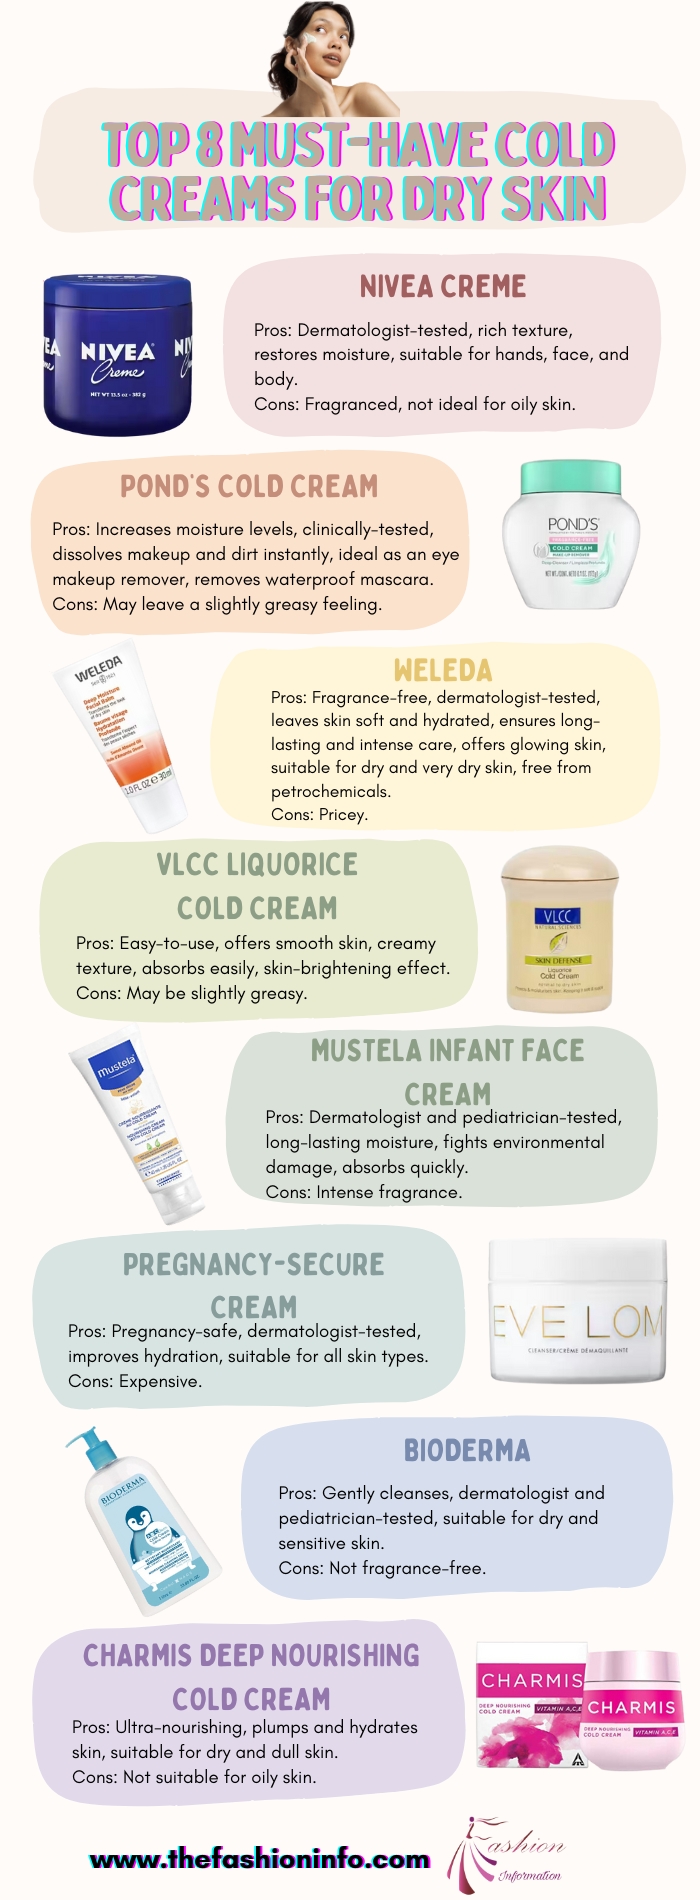 Top 8 Must-Have Cold Creams For Dry Skin